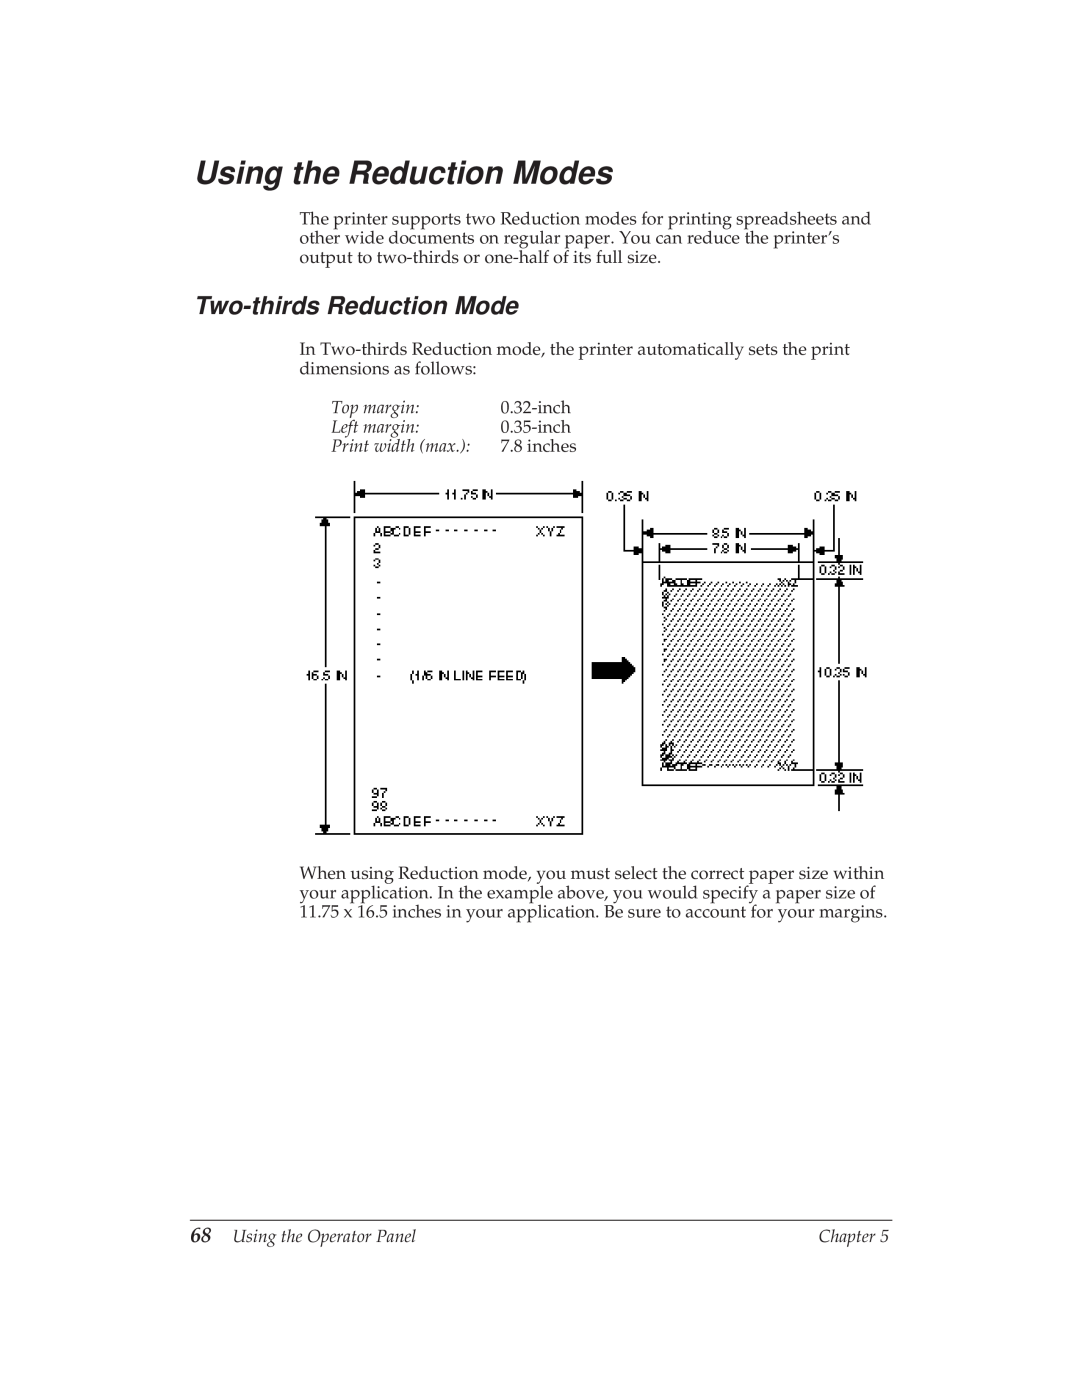 Canon BJ-30 manual Using the Reduction Modes, Two-thirds Reduction Mode 